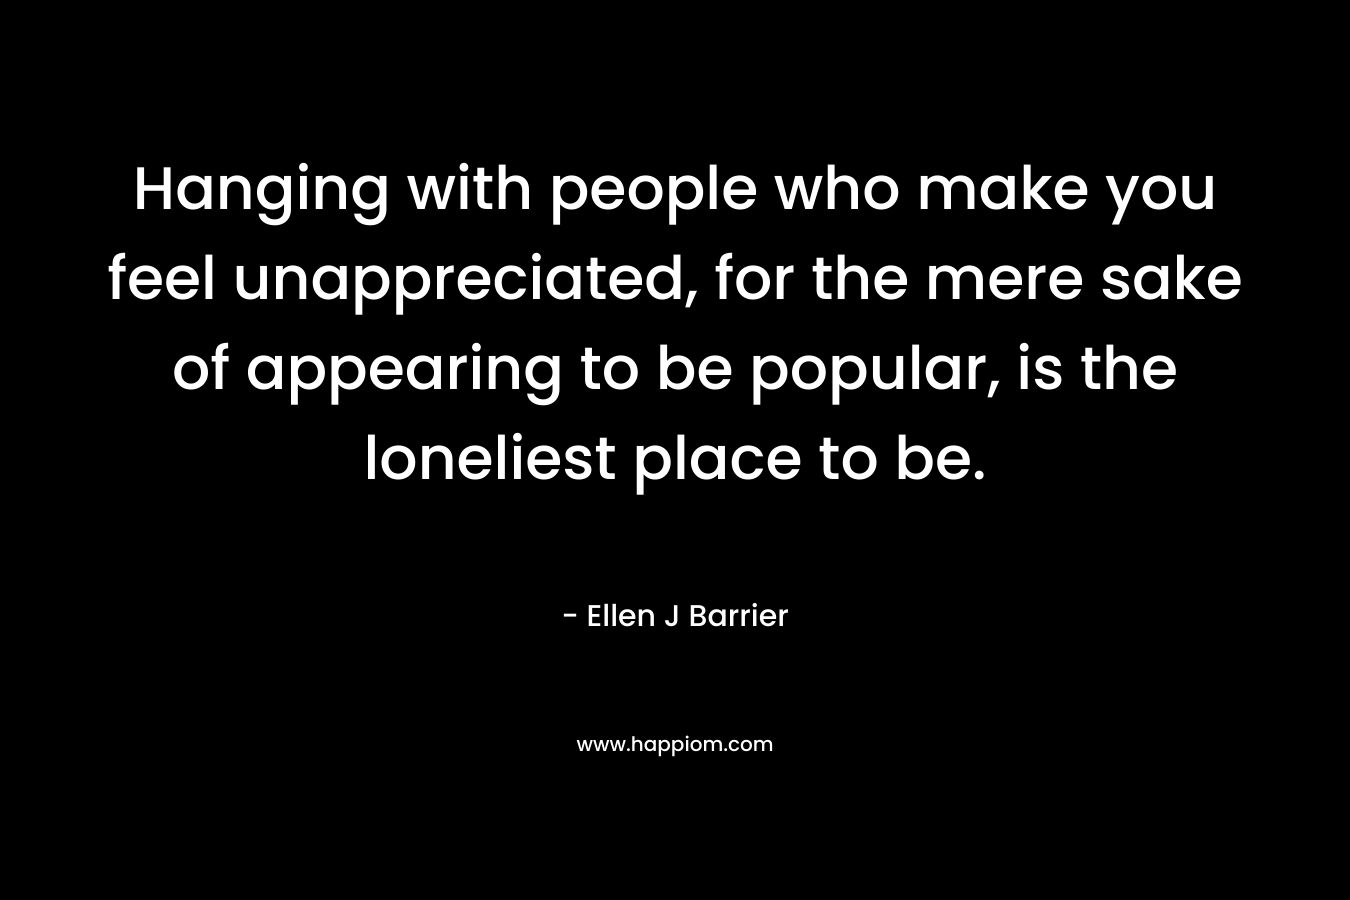 Hanging with people who make you feel unappreciated, for the mere sake of appearing to be popular, is the loneliest place to be. – Ellen J Barrier